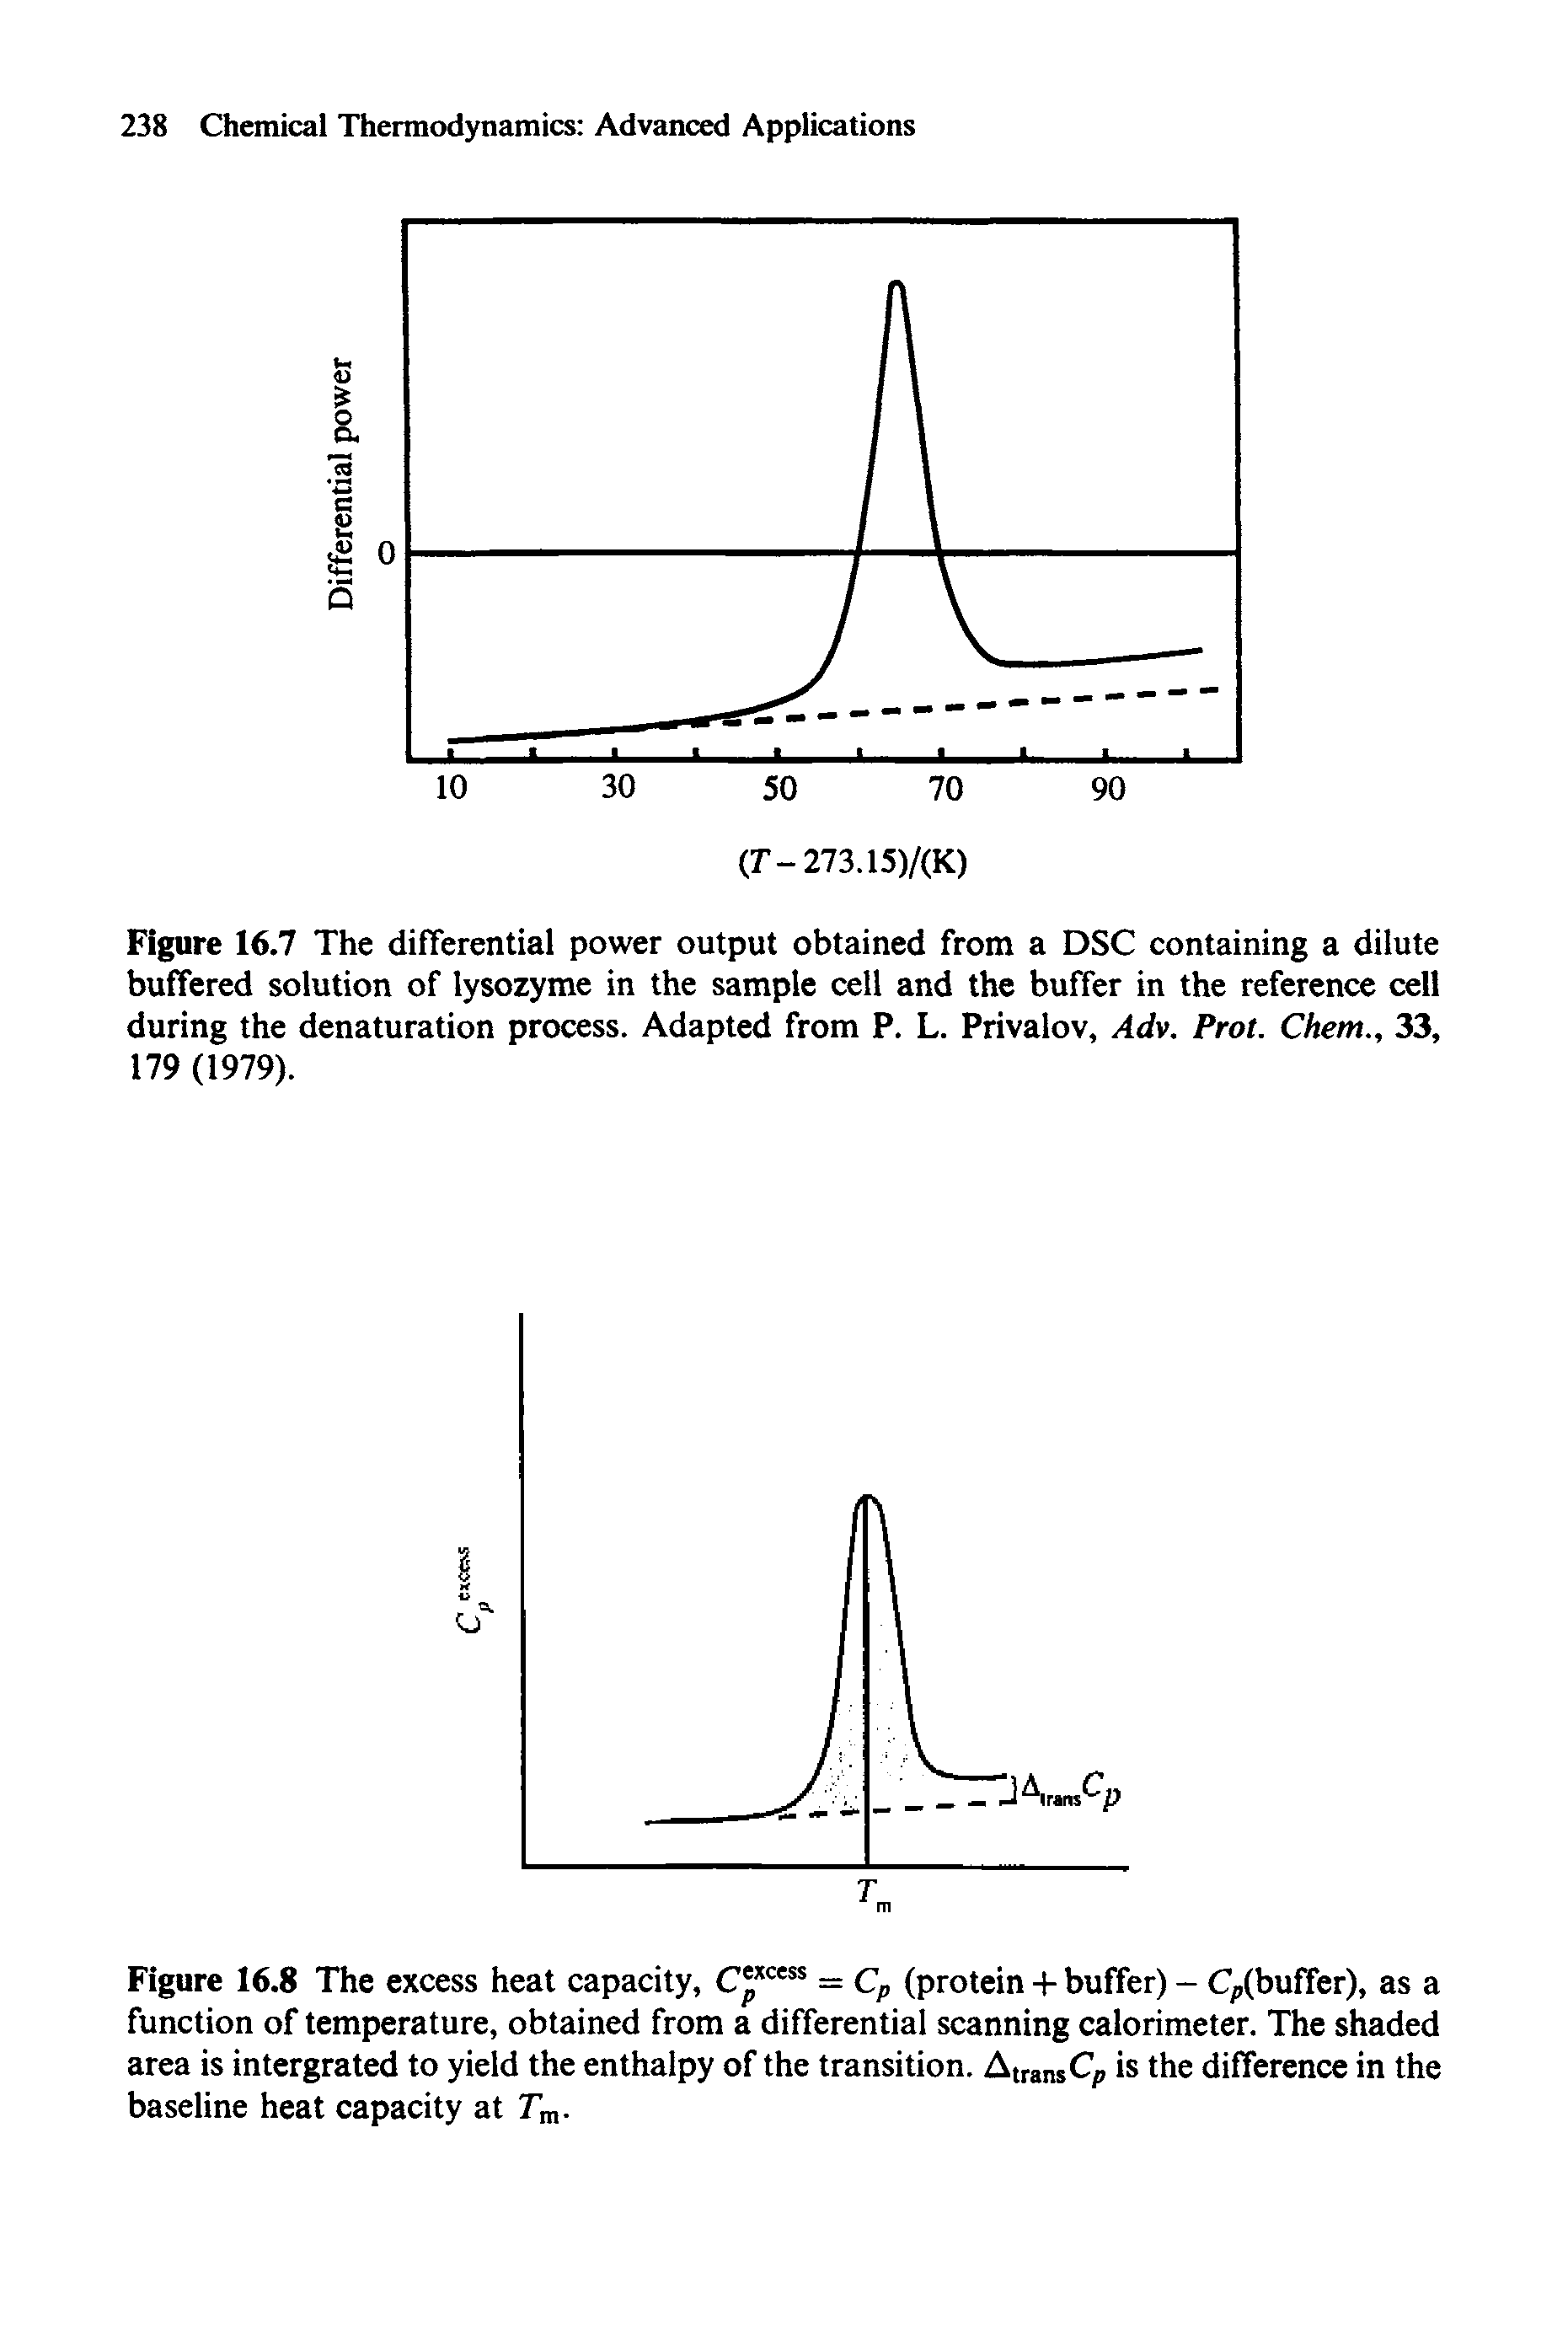 Figure 16.7 The differential power output obtained from a DSC containing a dilute buffered solution of lysozyme in the sample cell and the buffer in the reference cell during the denaturation process. Adapted from P. L. Privalov, Adv. Prot. Chem., 33, 179 (1979).